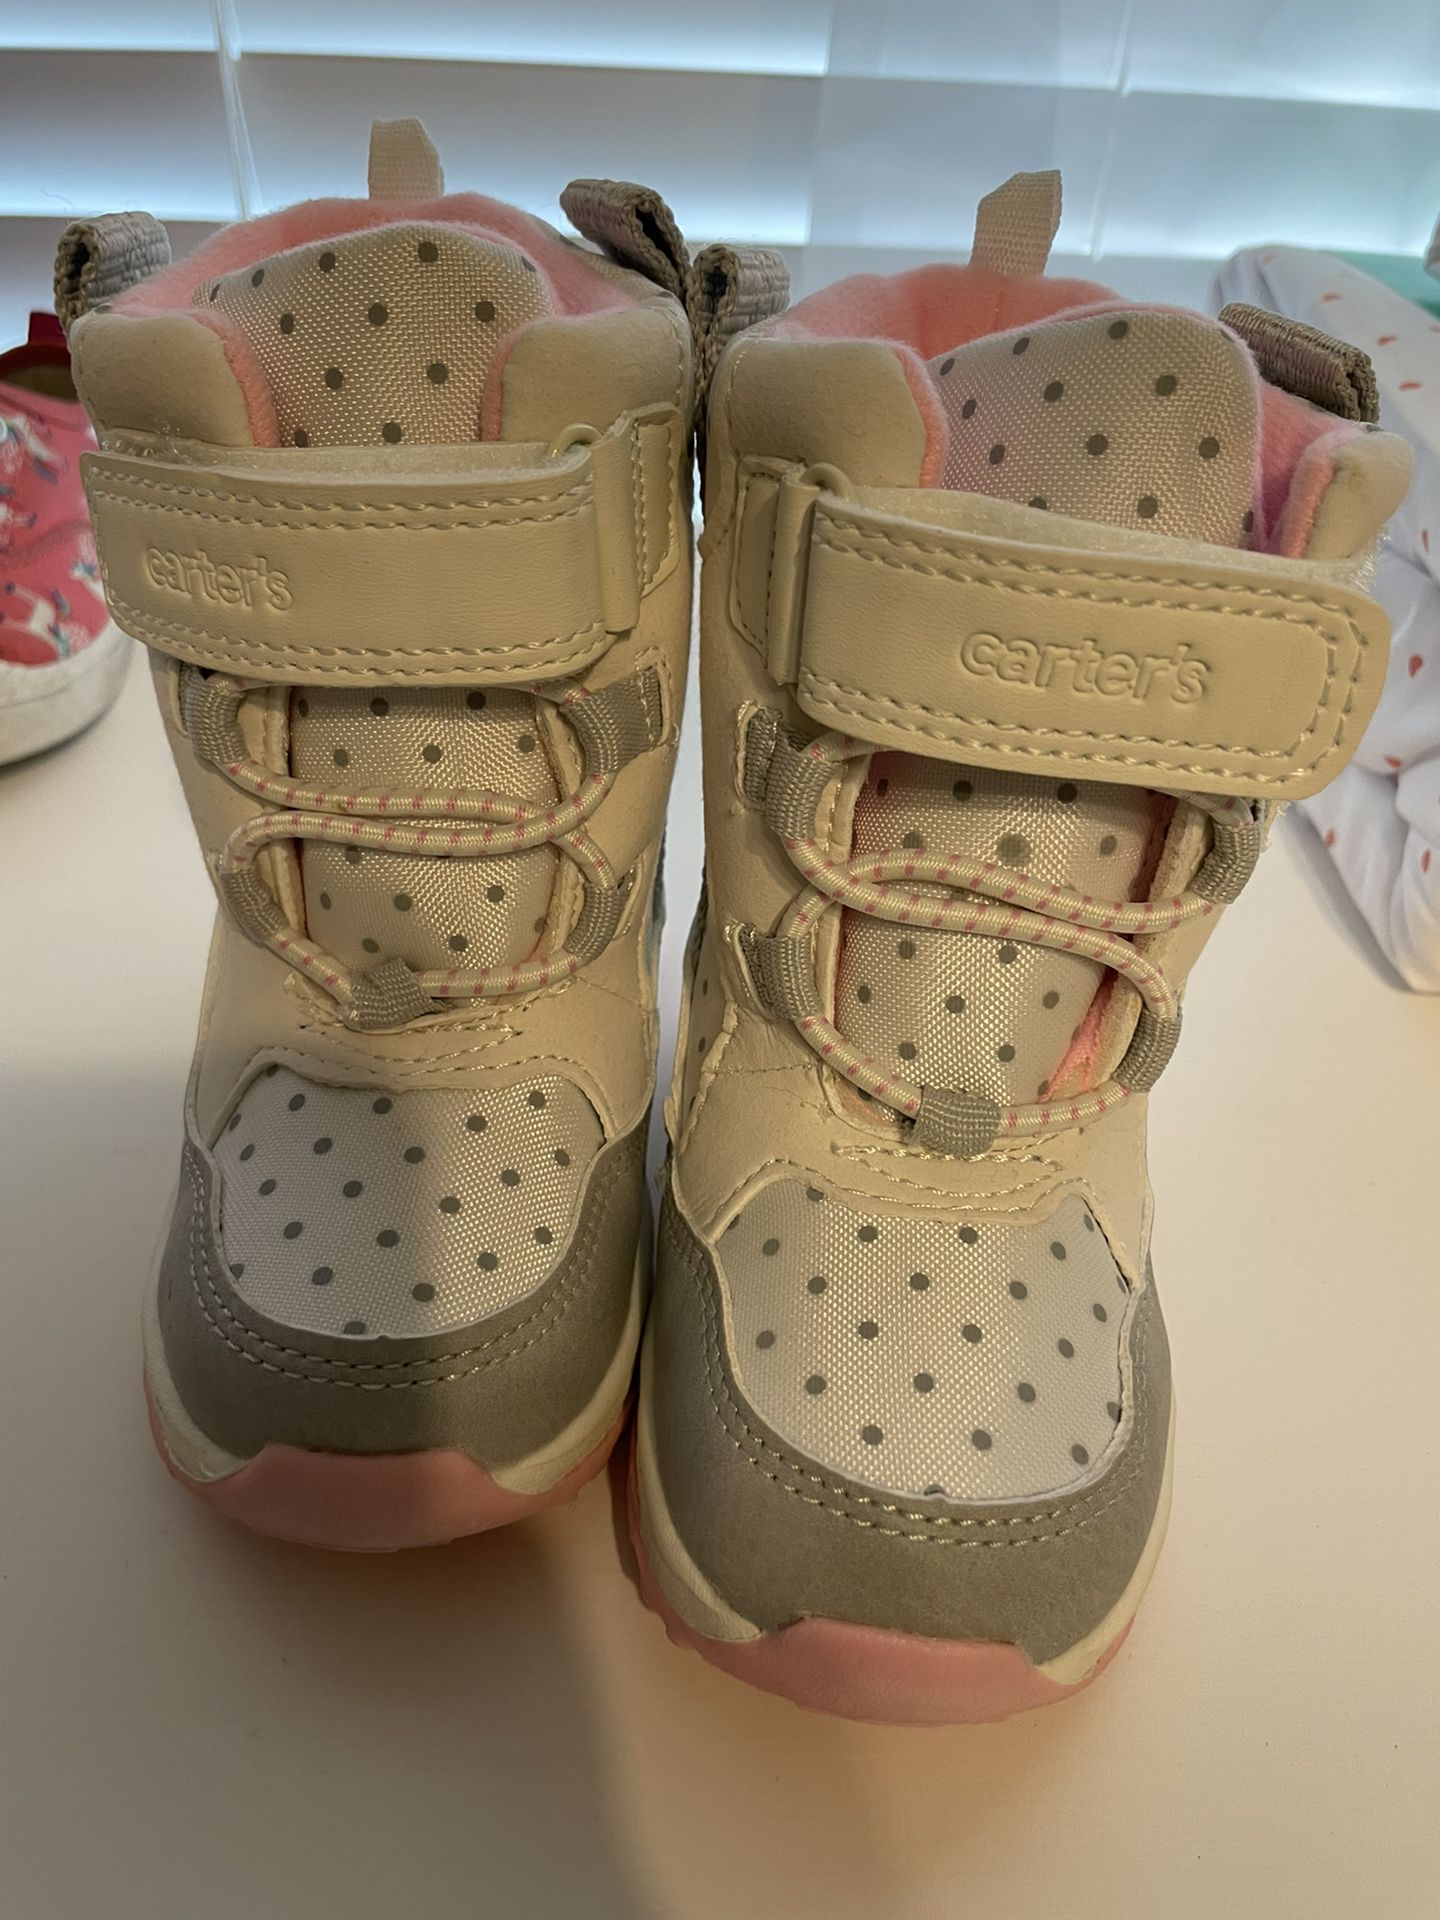 Carters Toddler Snow Boots